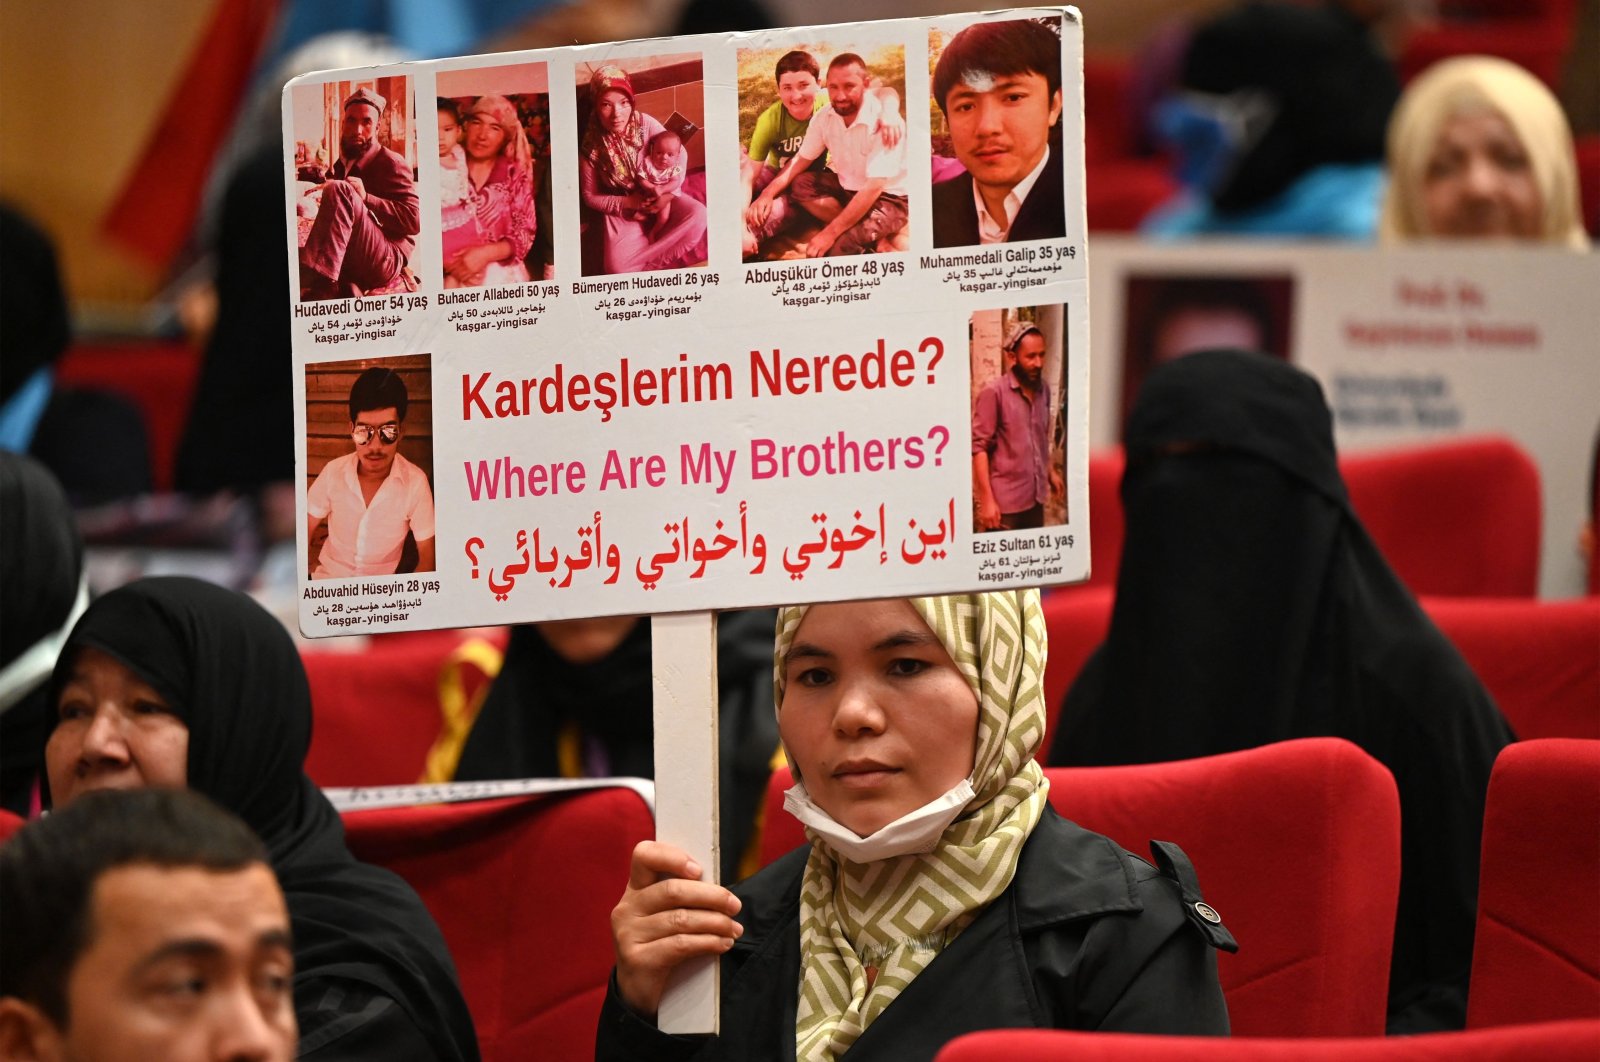 Members of the Muslim Uyghur minority present pictures of their relatives detained in China during a press conference in Istanbul, Turkey, May 10, 2022. (AFP Photo)